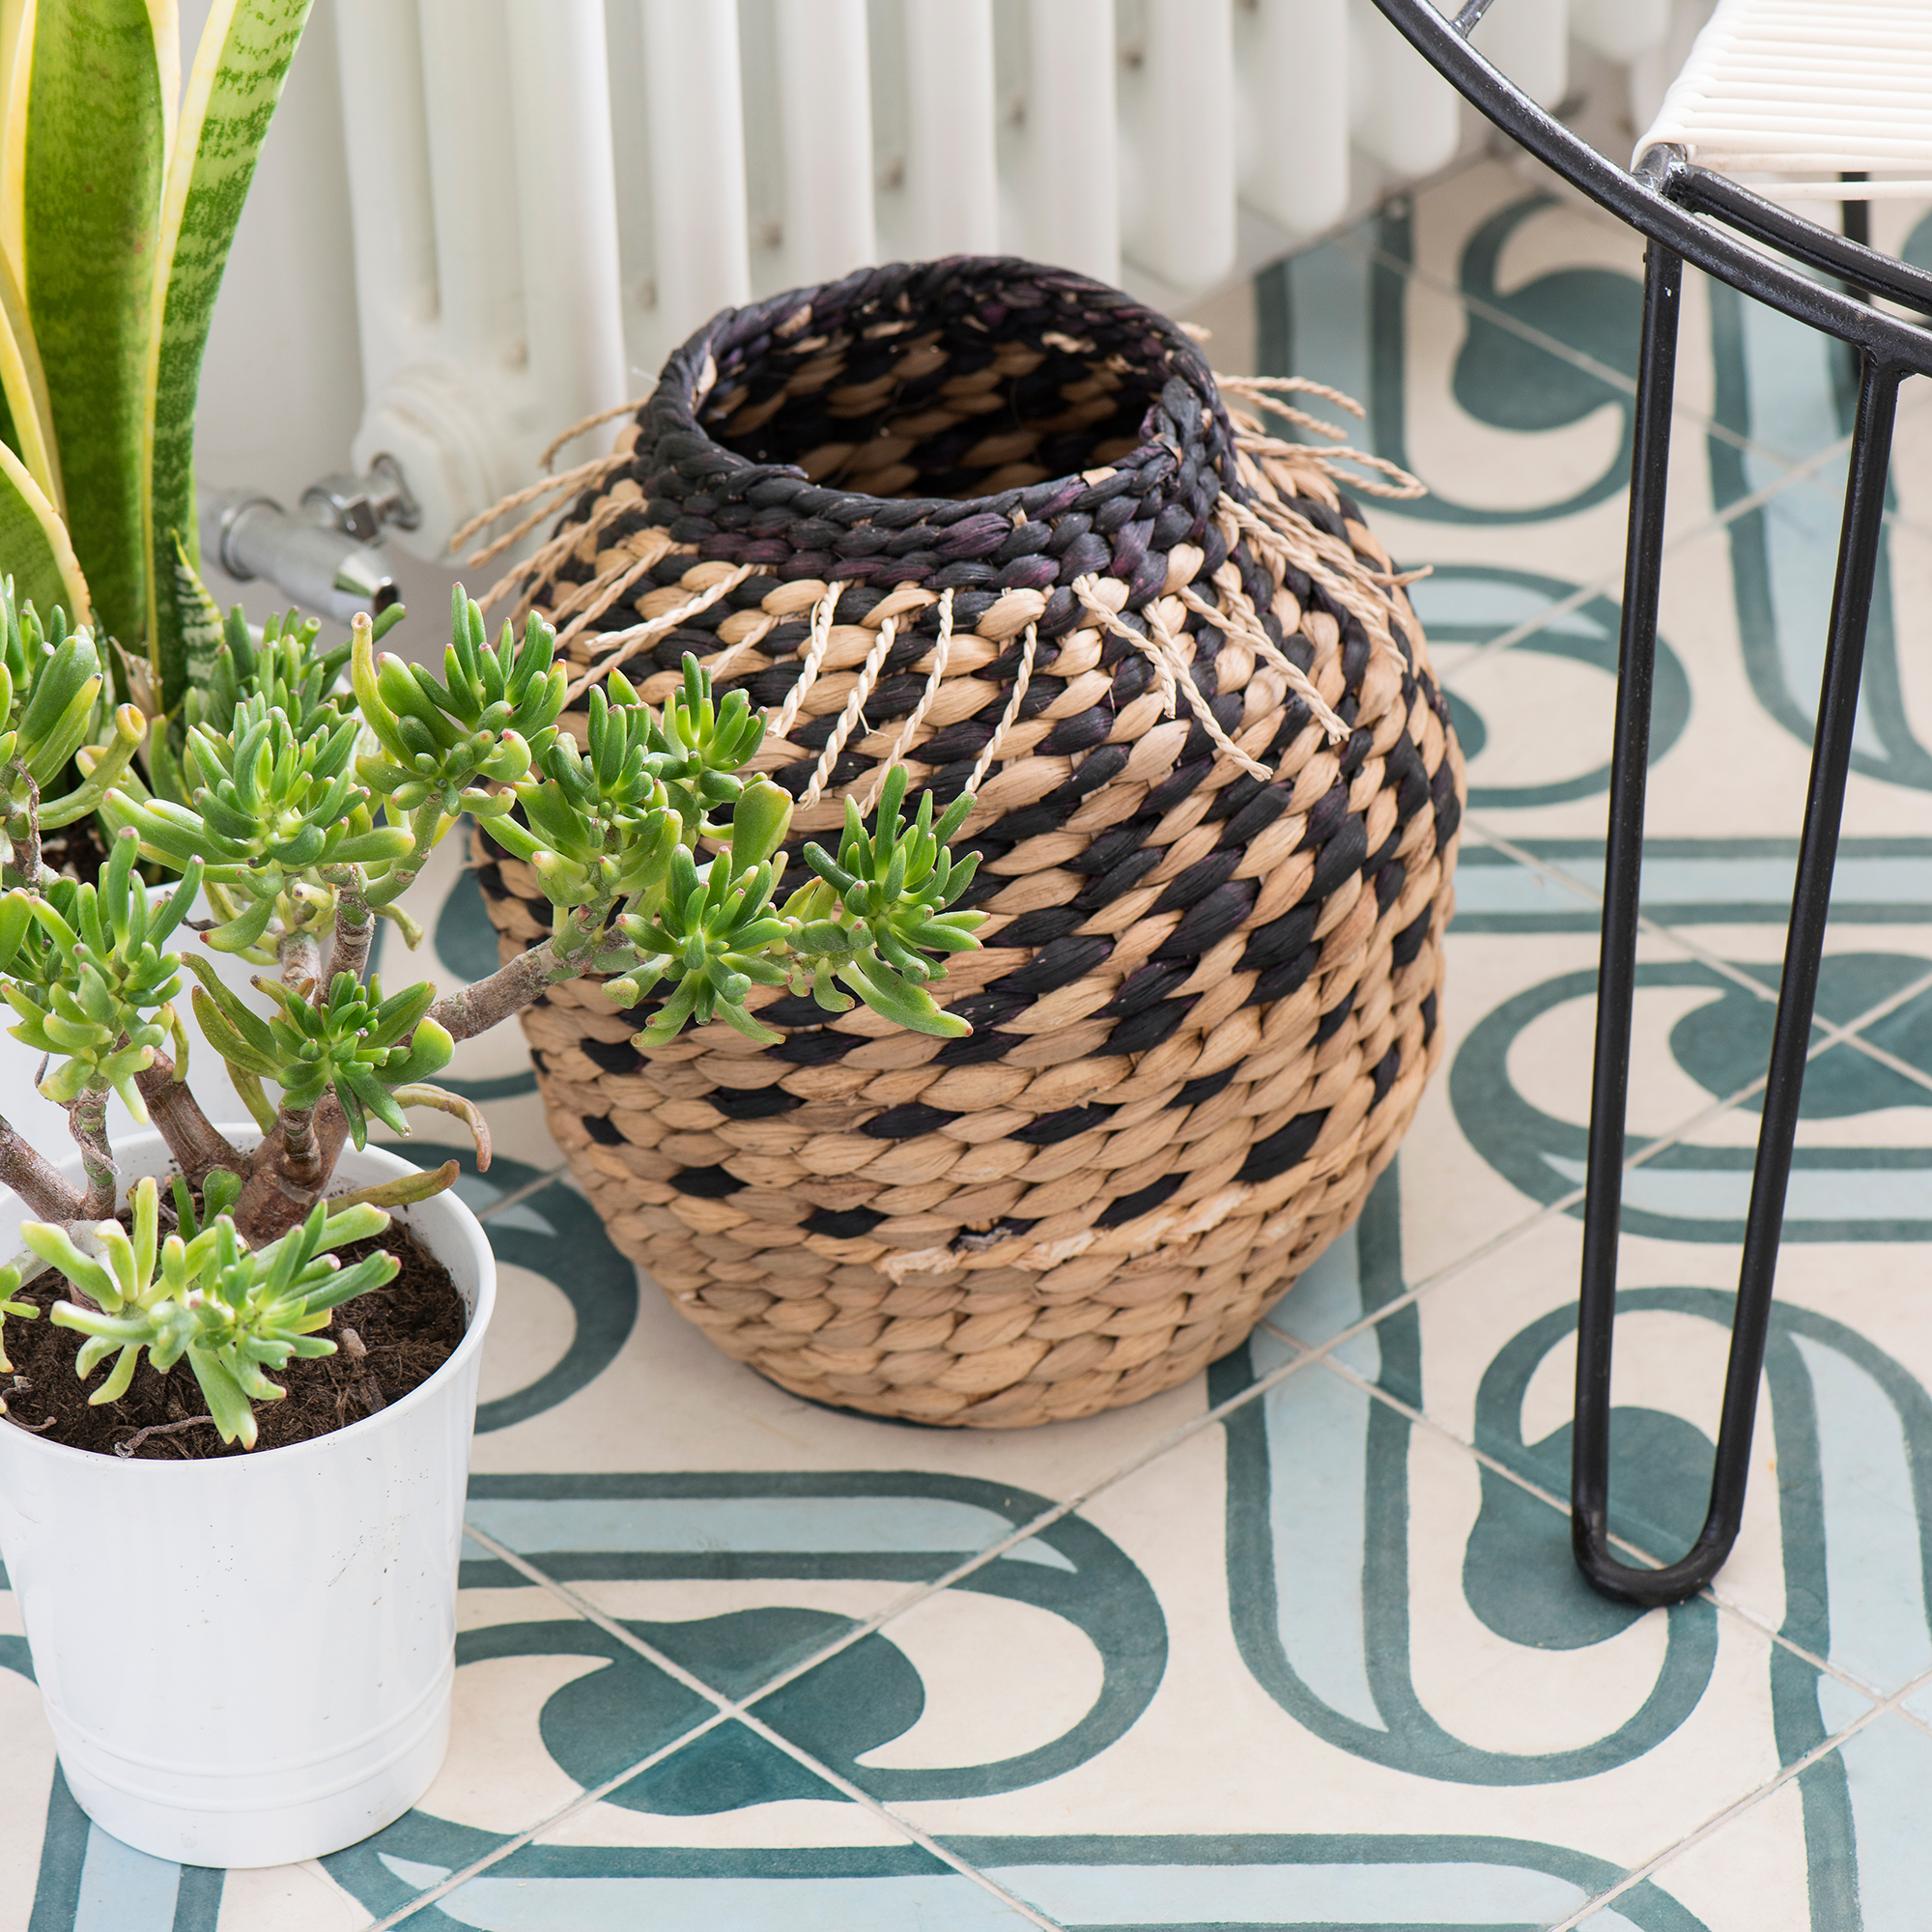 Houseplants and a storage basket on the blue patterned tiled floor of a white bathroom